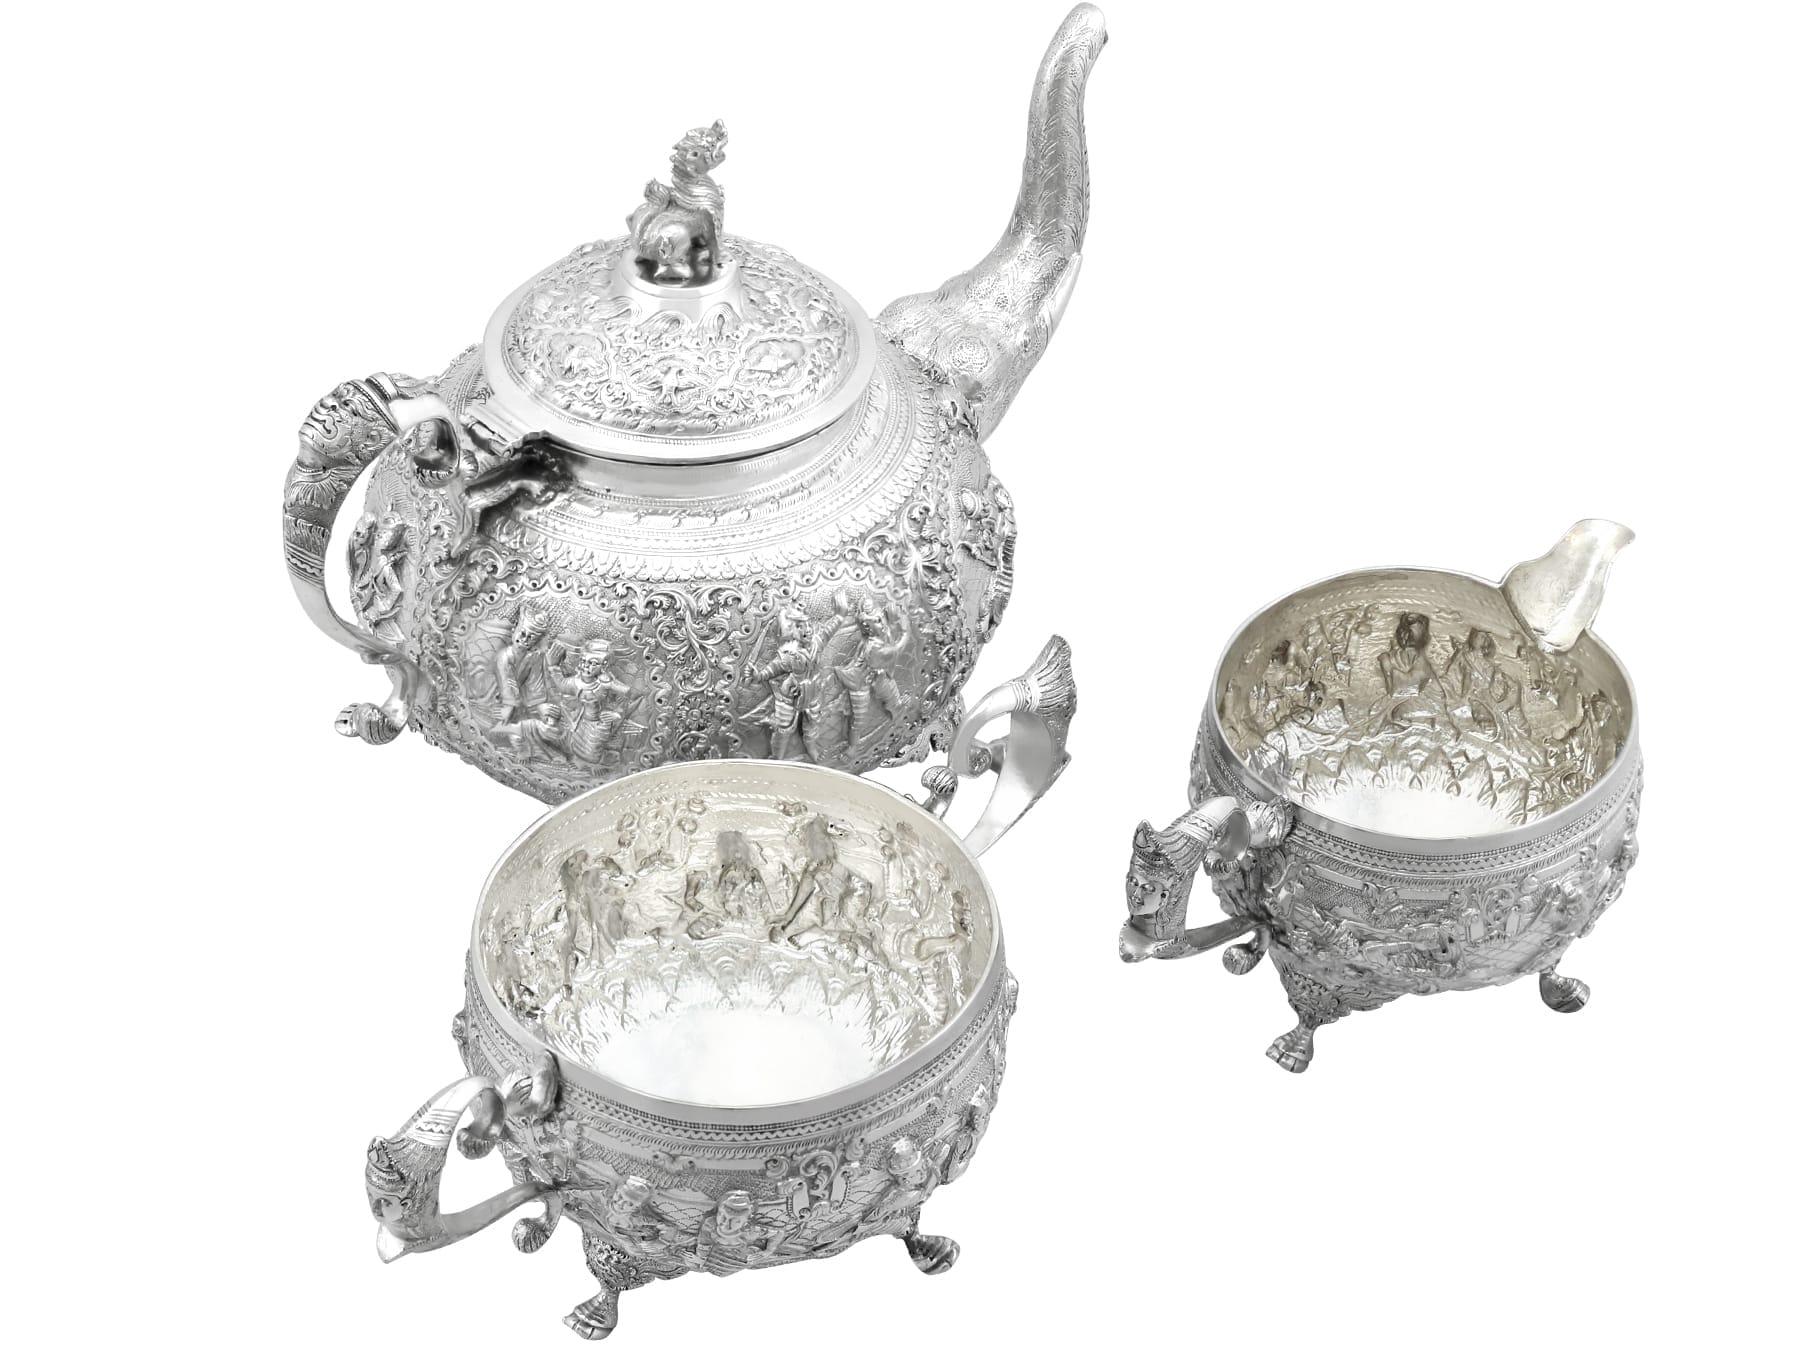  Antique Indian Silver Three Piece Tea Service In Excellent Condition For Sale In Jesmond, Newcastle Upon Tyne